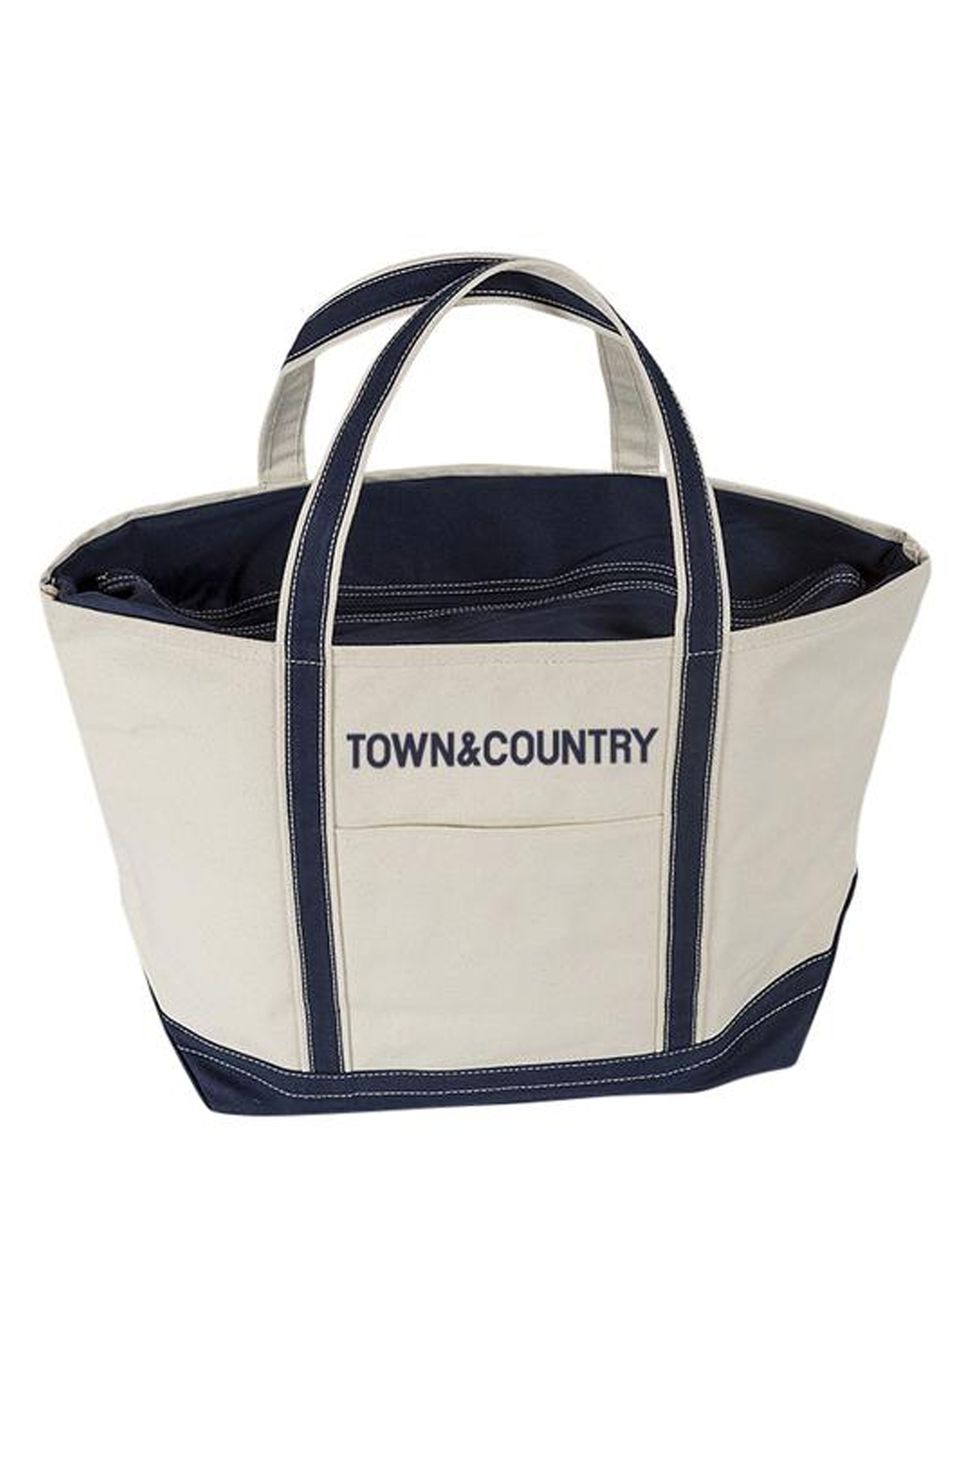 Limited Edition Tote Bag, Navy